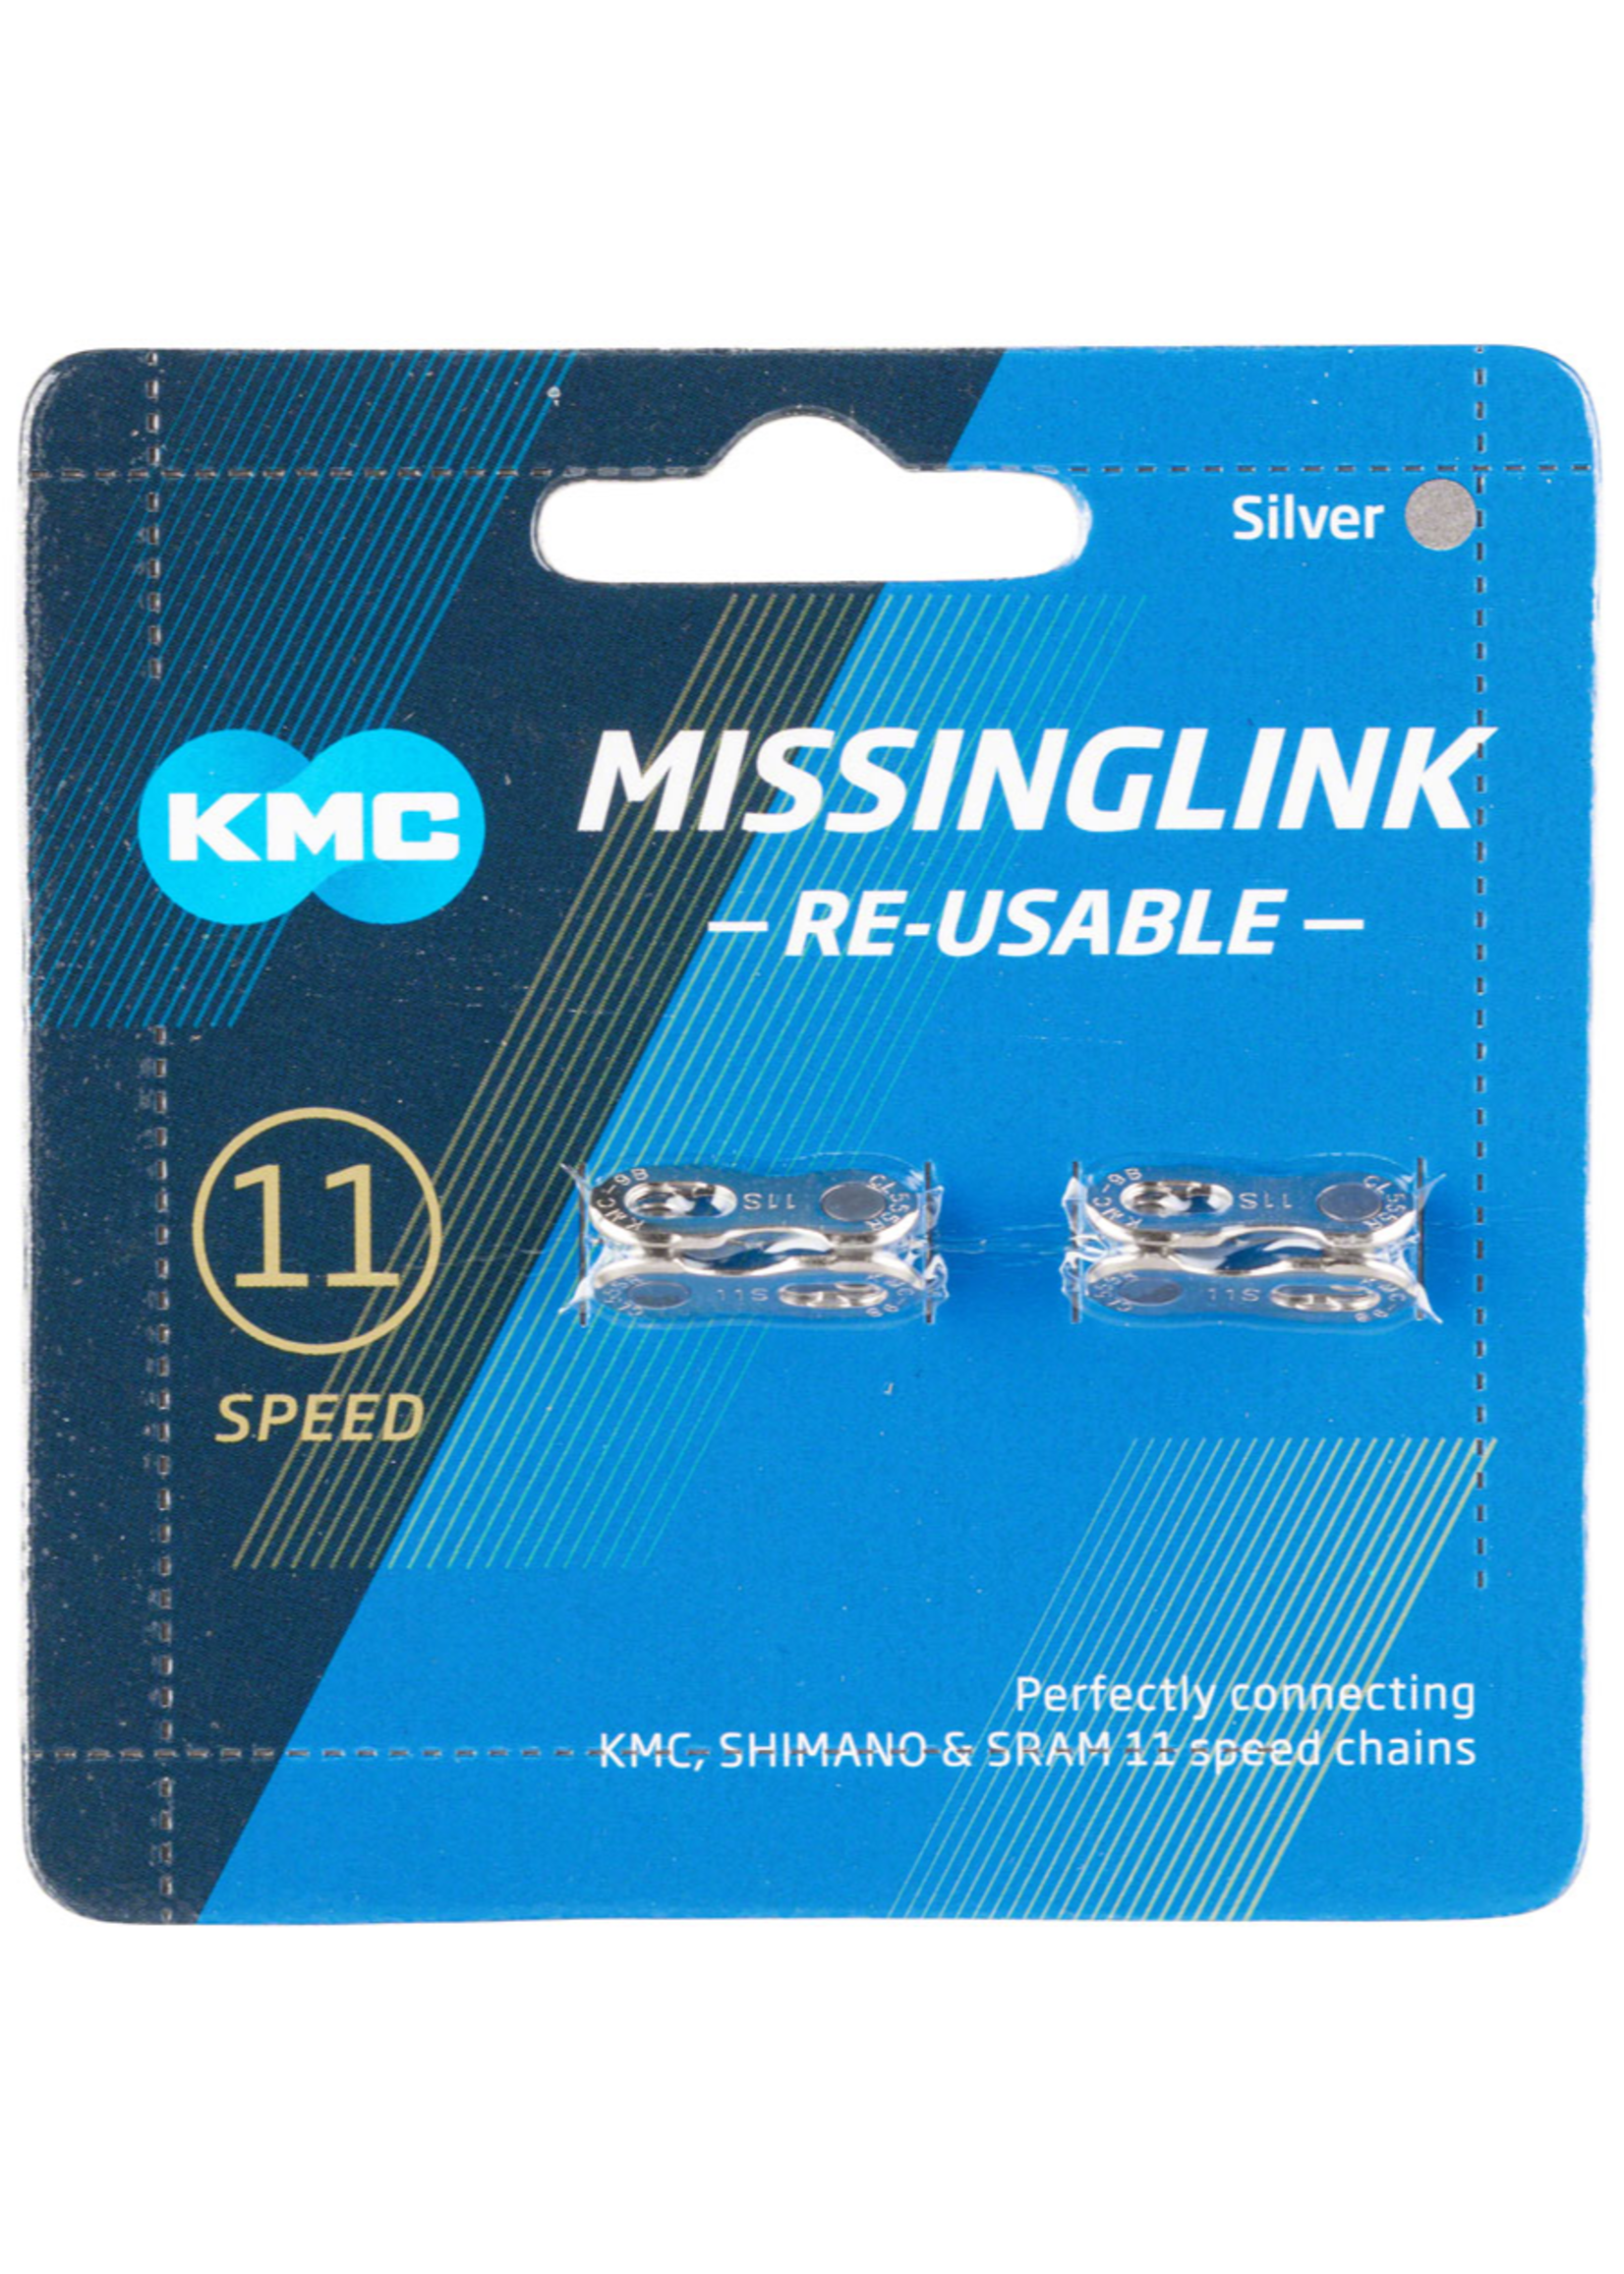 KMC KMC MissingLink-11 Connector - 11-Speed, Reusable, Silver, 2 Pairs/Card